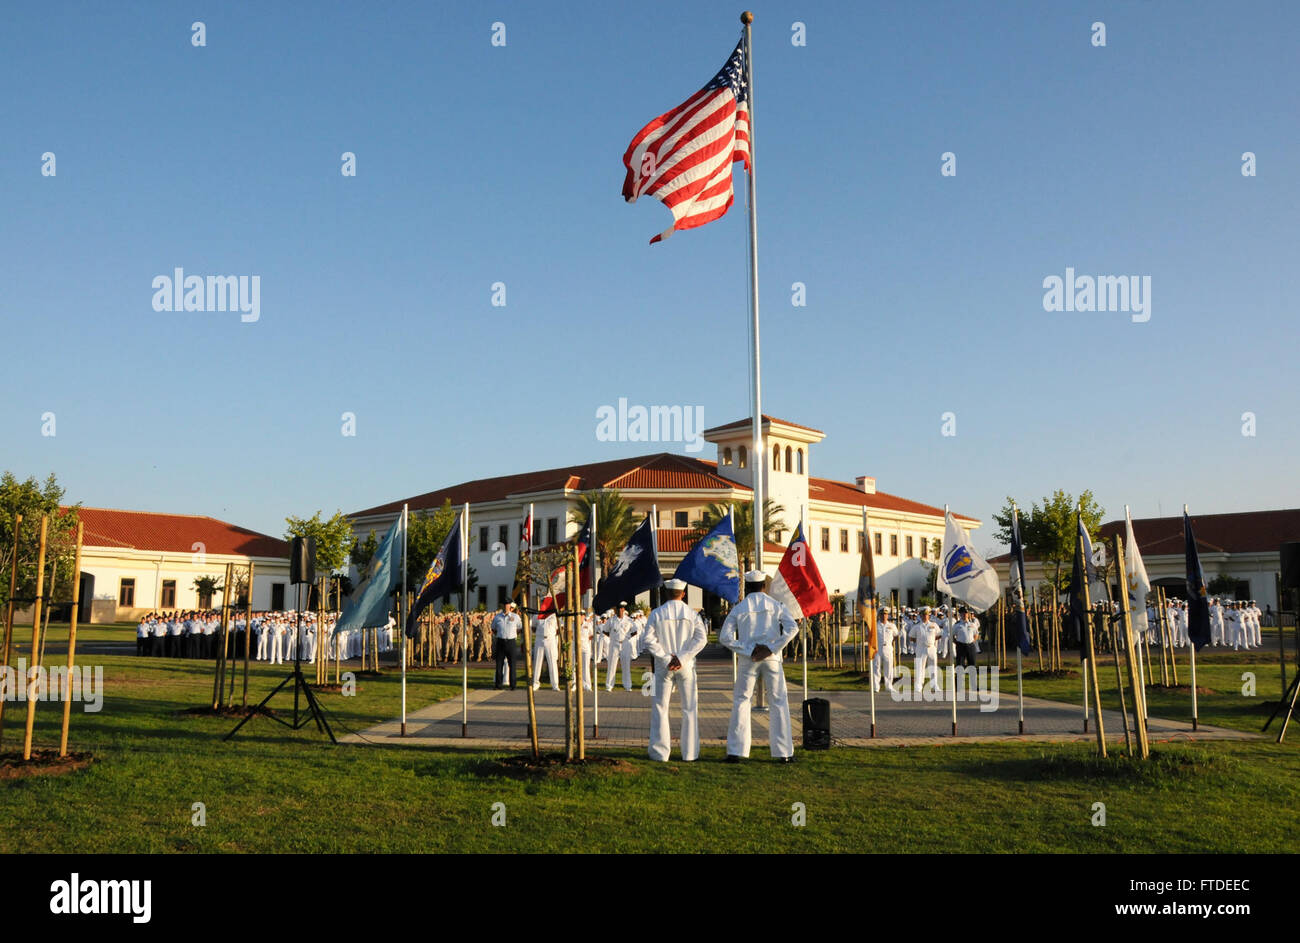 150702-N-UI568-143 NAVAL STATION ROTA, Spain (July 2, 2015) - Service members assigned to Commander, U.S. Naval Activities Spain stand at attention during the annual flag-raising ceremony Naval Station Rota, Spain, July 2.  While raising the flag is a daily occurrence on most U.S. military installations around the world, Naval Station Rota is only permitted to fly the American flag with special permission from the base’s Spanish admiral in chief in accordance with the Agreement on Defense Cooperation.  (U.S. Navy photo by Morgan Over/Released) Stock Photo